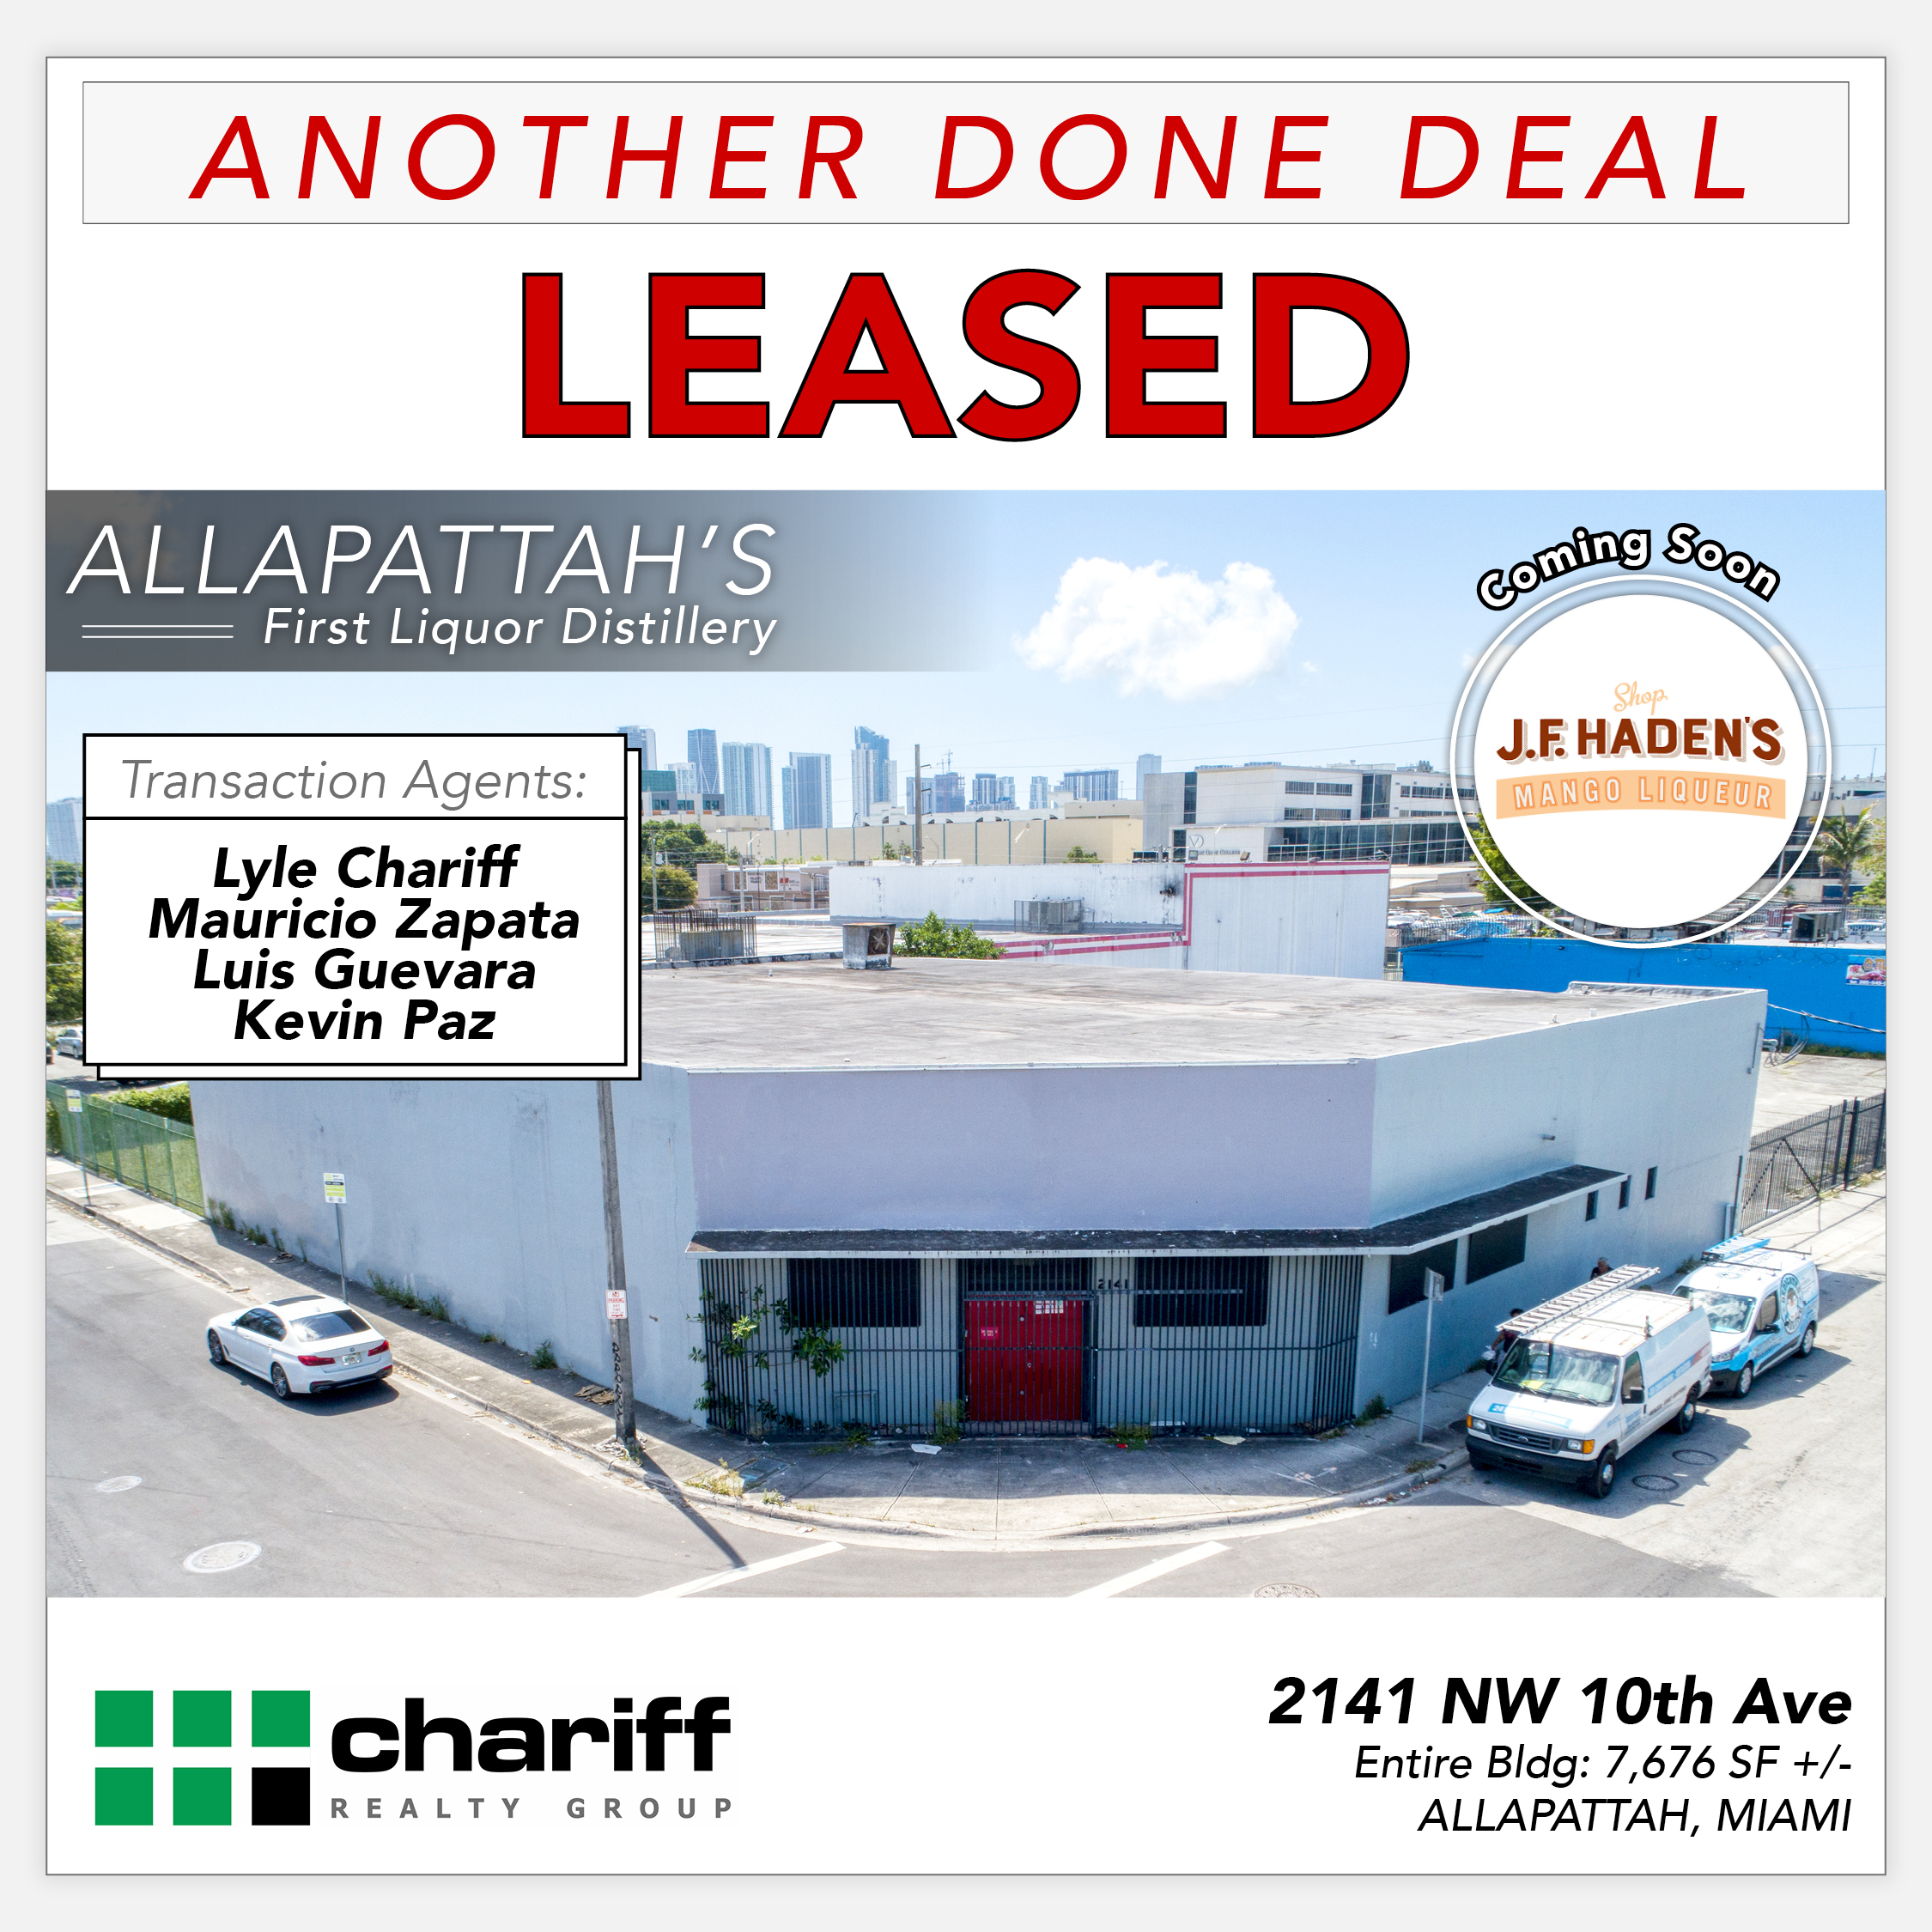 2141 NW 10th Ave - Another Done Deal- Leased - Allapattah -Miami-Florida-33142-Chariff Realty Group